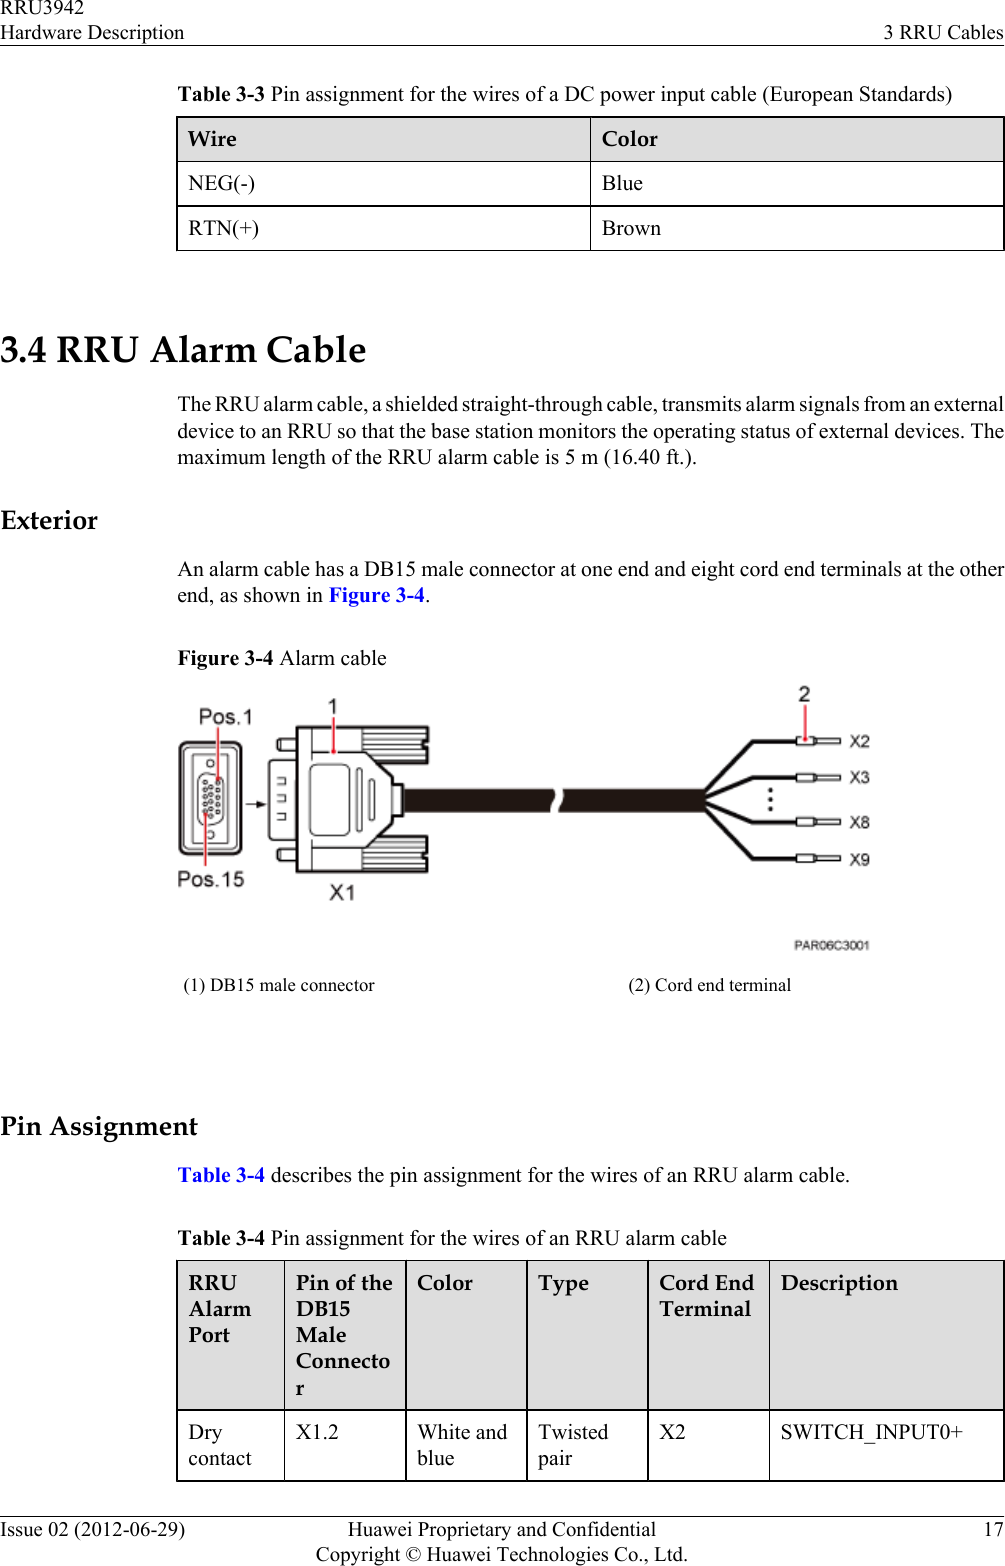 Table 3-3 Pin assignment for the wires of a DC power input cable (European Standards)Wire ColorNEG(-) BlueRTN(+) Brown 3.4 RRU Alarm CableThe RRU alarm cable, a shielded straight-through cable, transmits alarm signals from an externaldevice to an RRU so that the base station monitors the operating status of external devices. Themaximum length of the RRU alarm cable is 5 m (16.40 ft.).ExteriorAn alarm cable has a DB15 male connector at one end and eight cord end terminals at the otherend, as shown in Figure 3-4.Figure 3-4 Alarm cable(1) DB15 male connector (2) Cord end terminal Pin AssignmentTable 3-4 describes the pin assignment for the wires of an RRU alarm cable.Table 3-4 Pin assignment for the wires of an RRU alarm cableRRUAlarmPortPin of theDB15MaleConnectorColor Type Cord EndTerminalDescriptionDrycontactX1.2 White andblueTwistedpairX2 SWITCH_INPUT0+RRU3942Hardware Description 3 RRU CablesIssue 02 (2012-06-29) Huawei Proprietary and ConfidentialCopyright © Huawei Technologies Co., Ltd.17